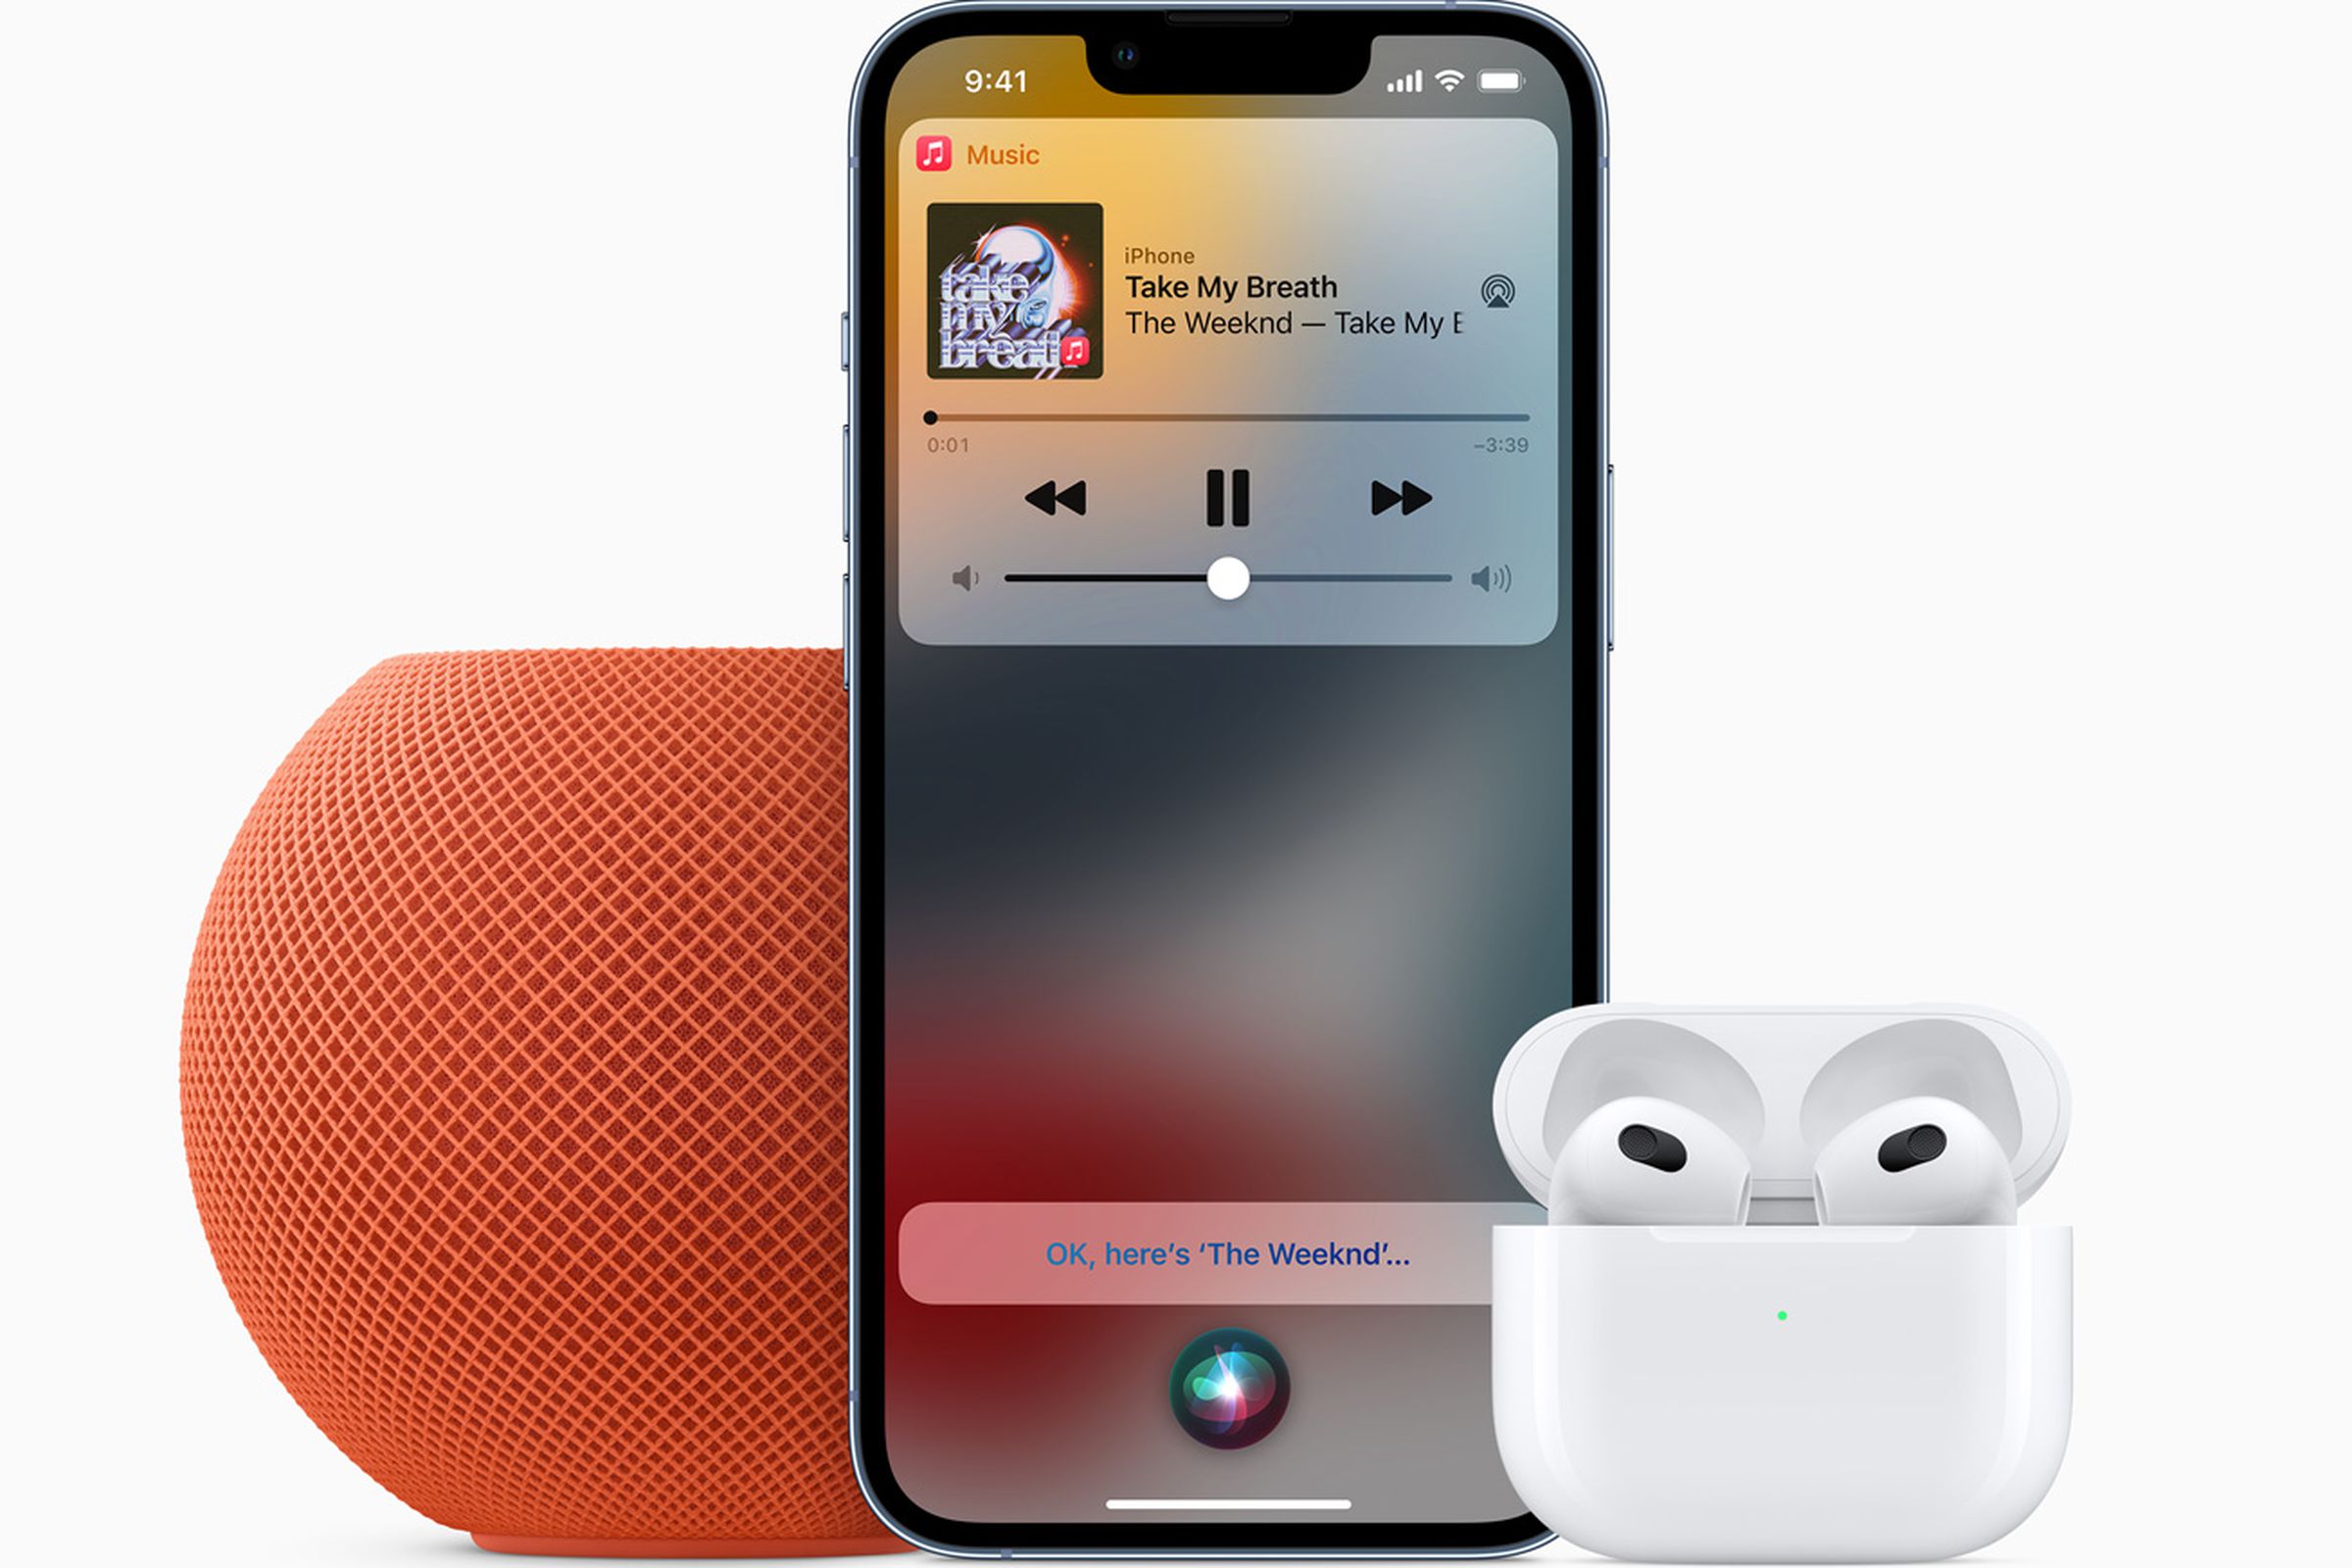 Apple Music Voice relies entirely on your dulcet tones to play music from any Siri-enabled device